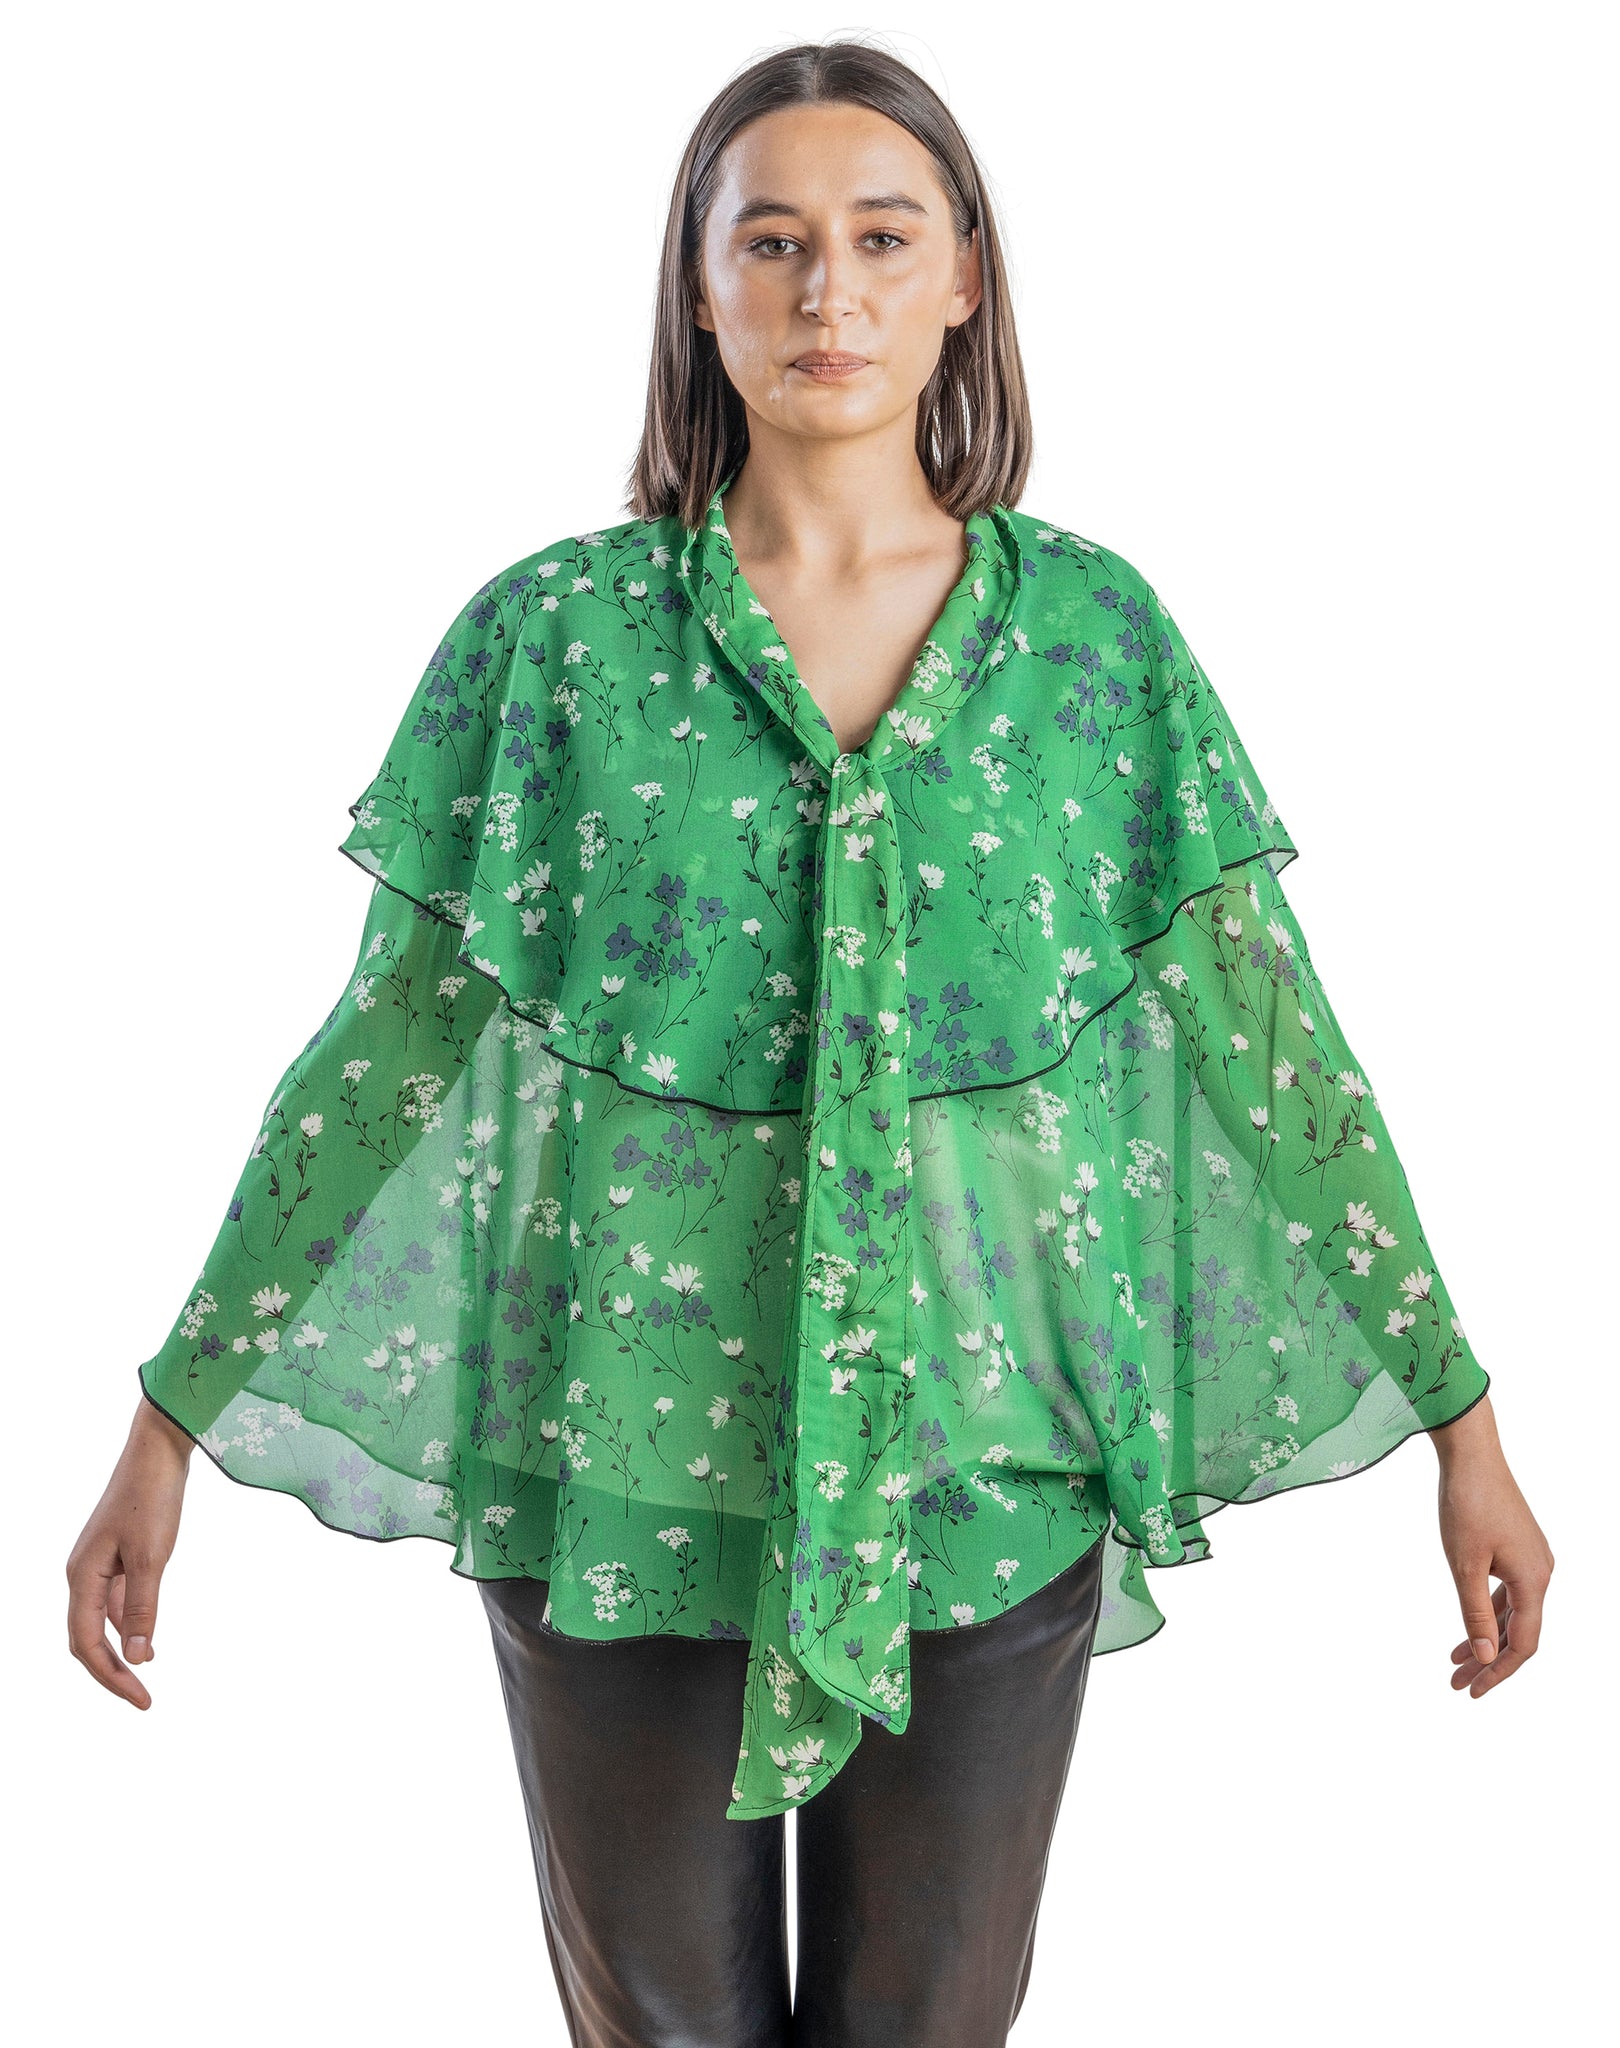 Printed Sheer Floral Poncho with bow tie.